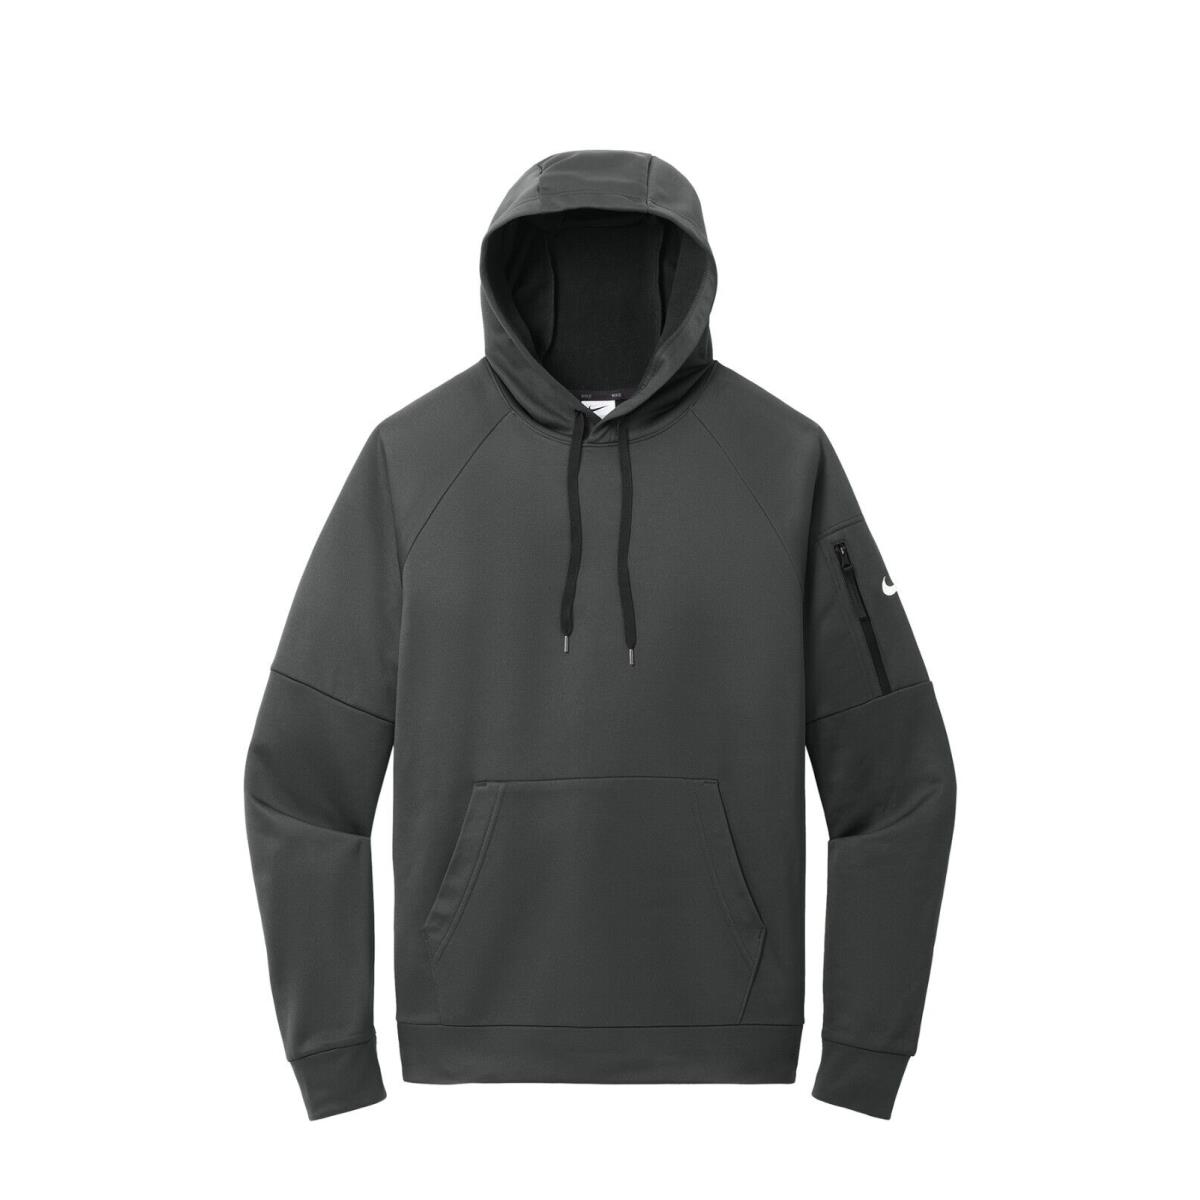 Nike Men`s Therma-fit Fleece Pullover Hoodie Drawcord Hood Arm Pocket XS-4XL S, Small